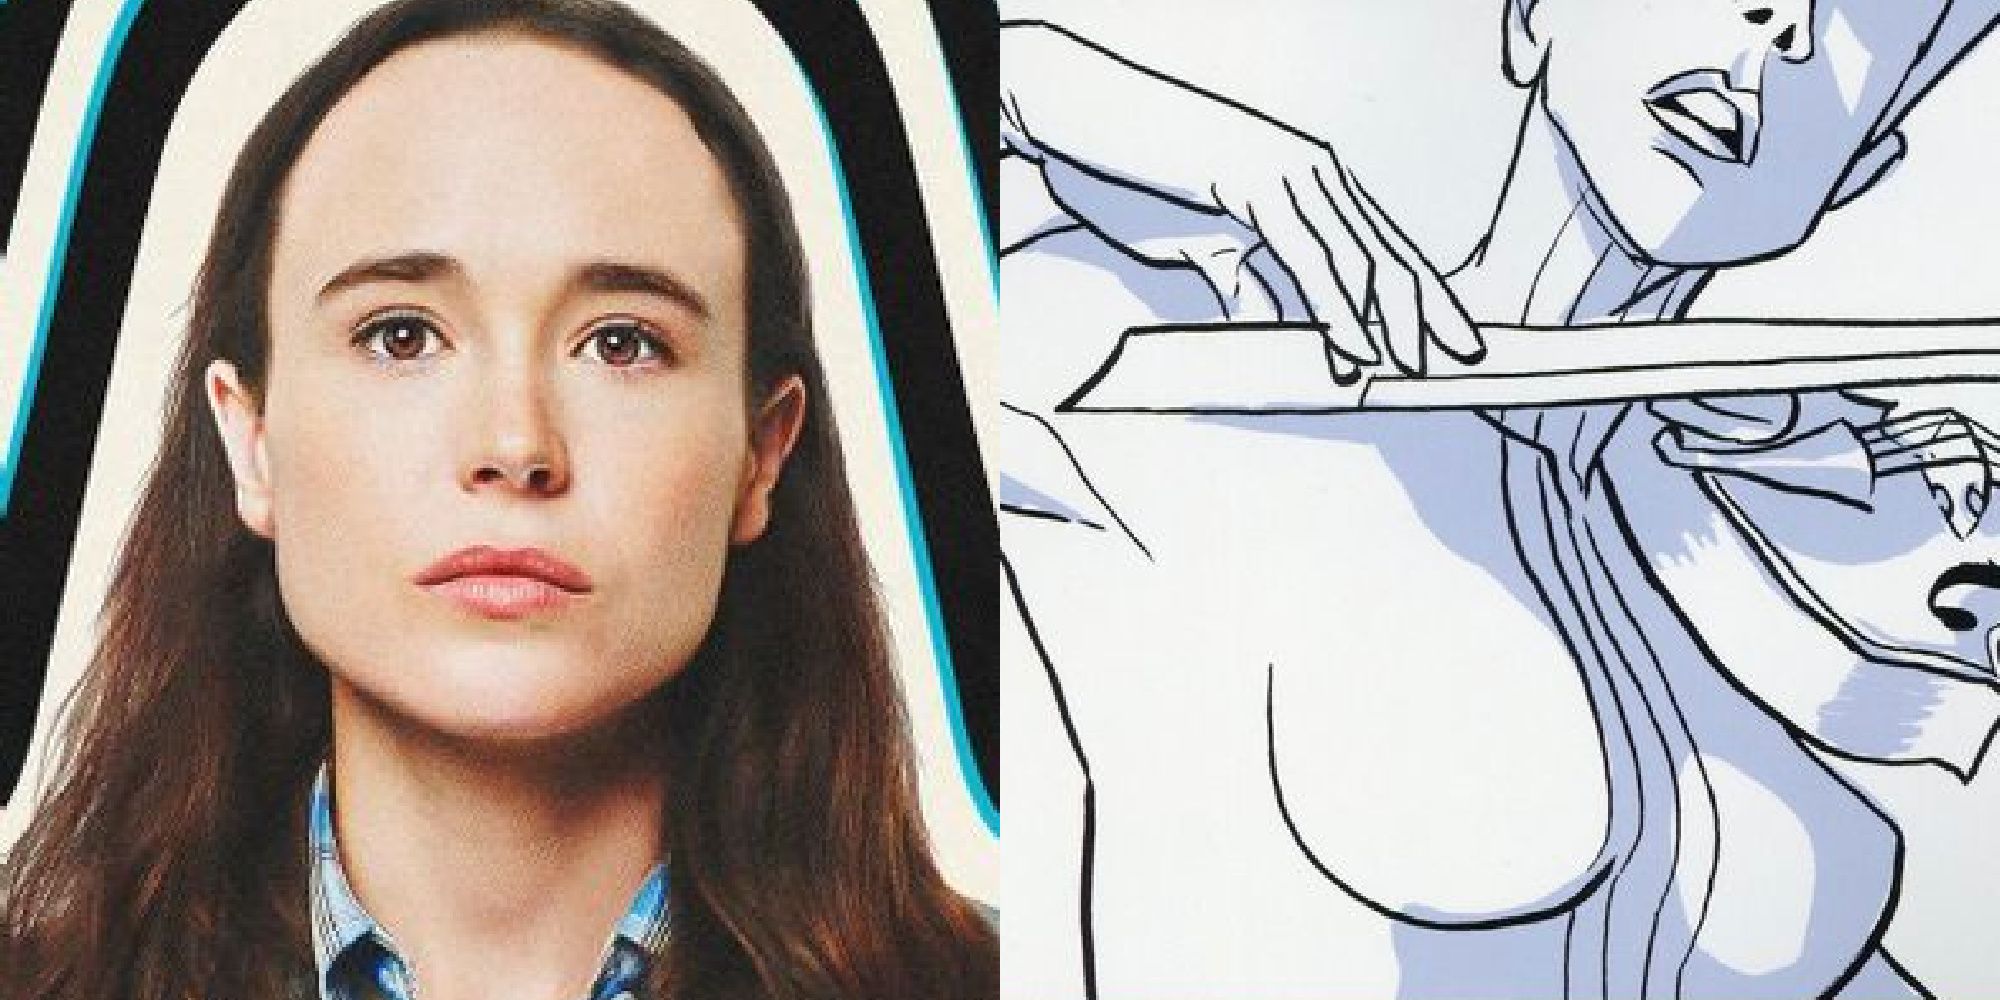 Split image of Vanya Hargreeves from Umbrella Academy TV show and from the comics.